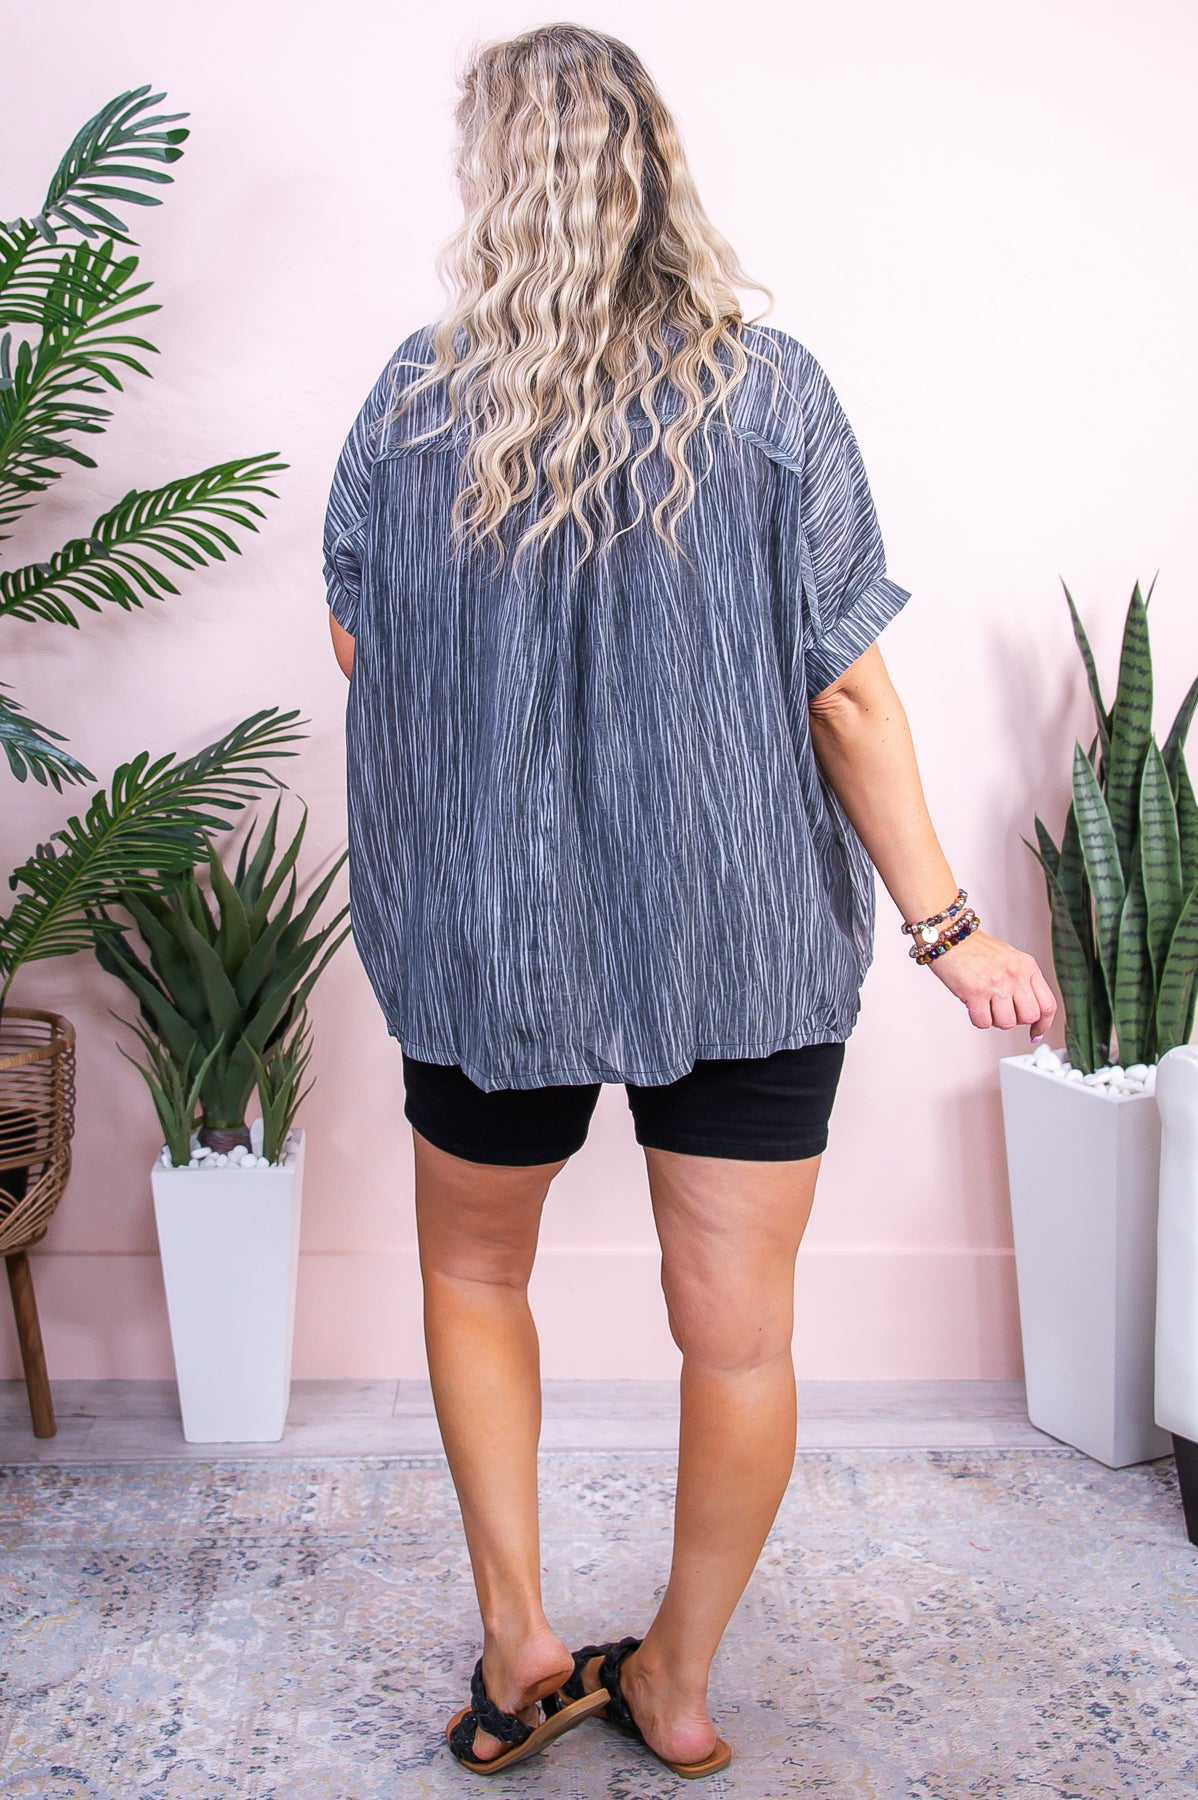 Tempted By Fate Charcoal Gray/Ivory Printed Top - T9256CG